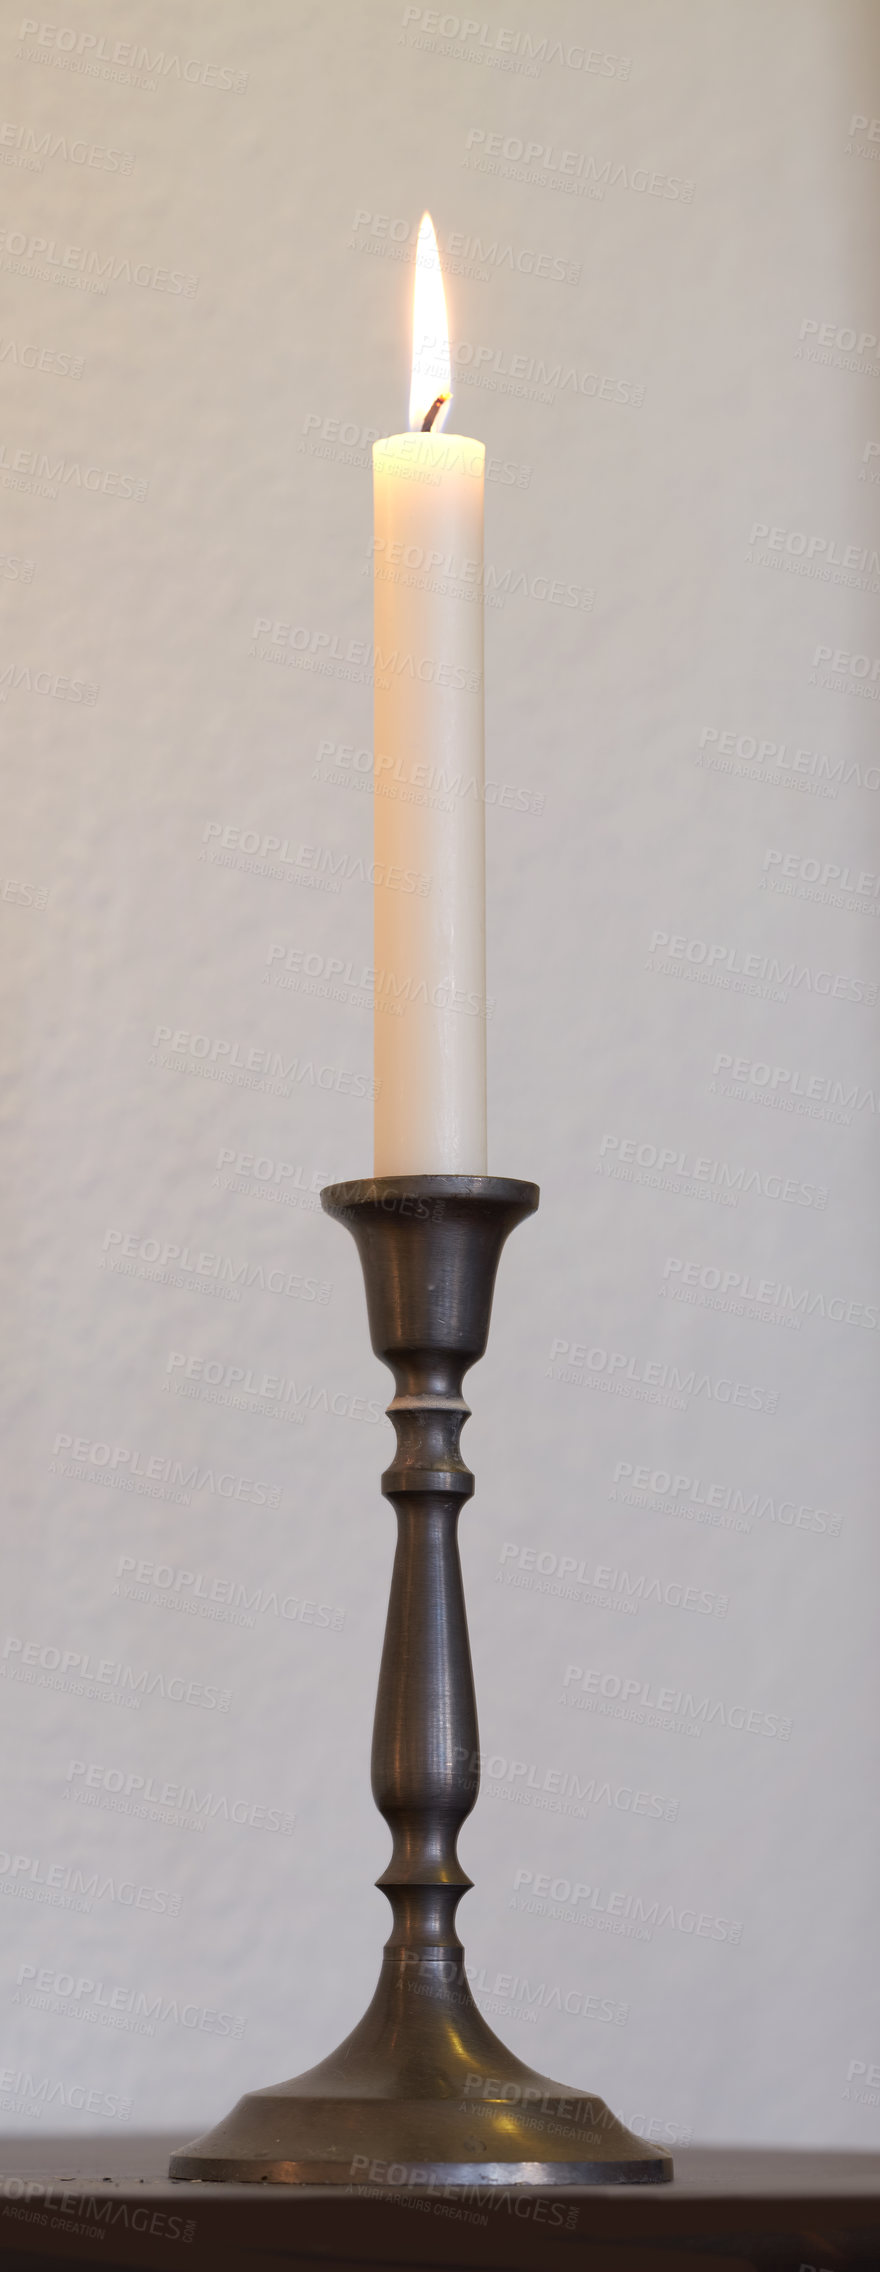 Buy stock photo One lit candle on a table at home for decoration and warmth. Beautiful house decor used for aroma, good scent and to bring light a room.